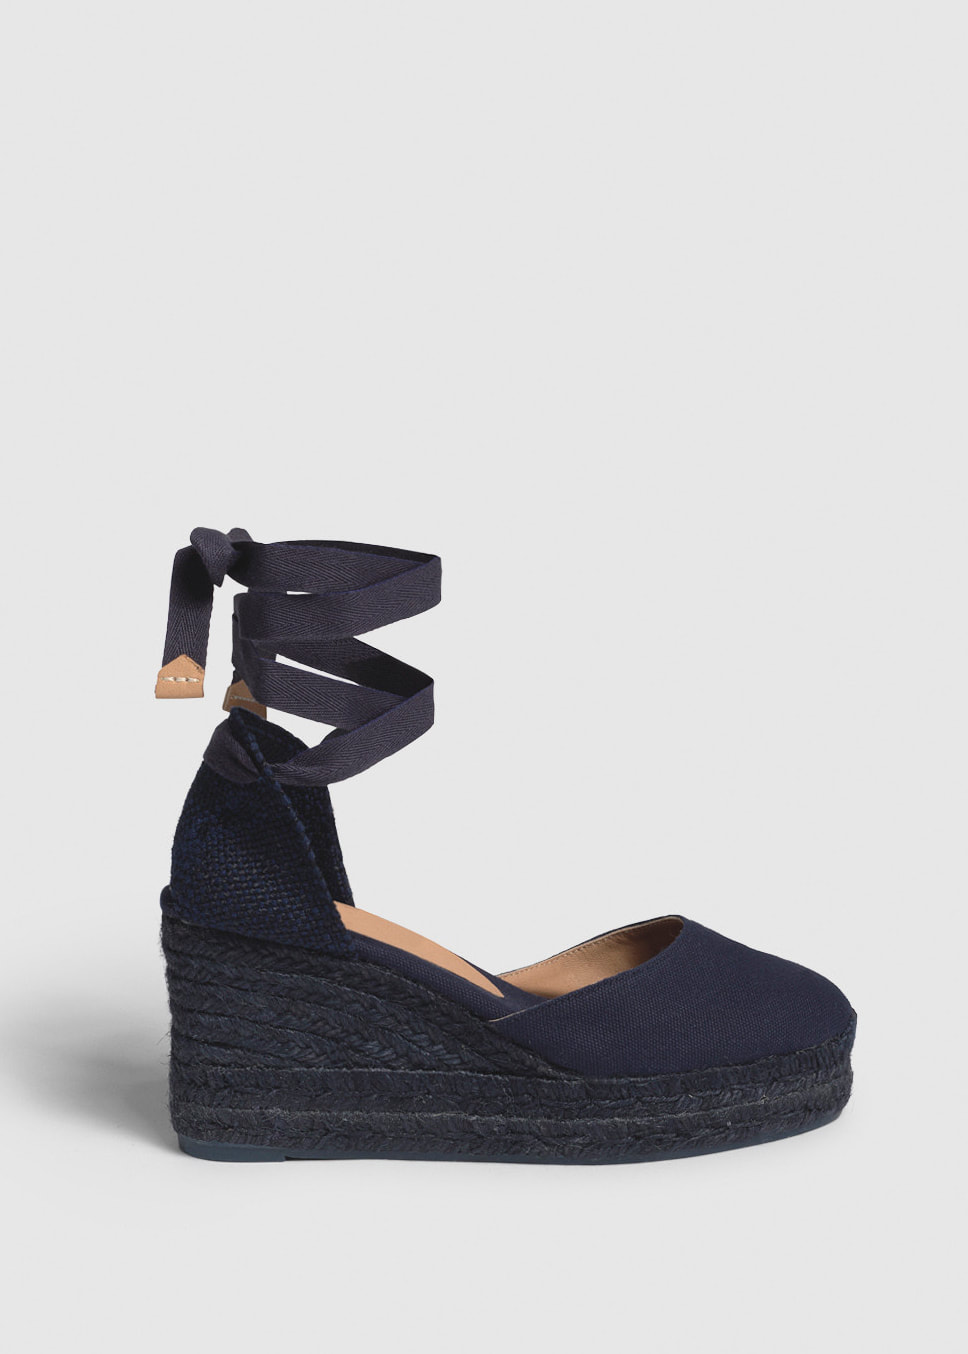 Castaner 'Carina' colorblock canvas wedge espadrille in navy blue